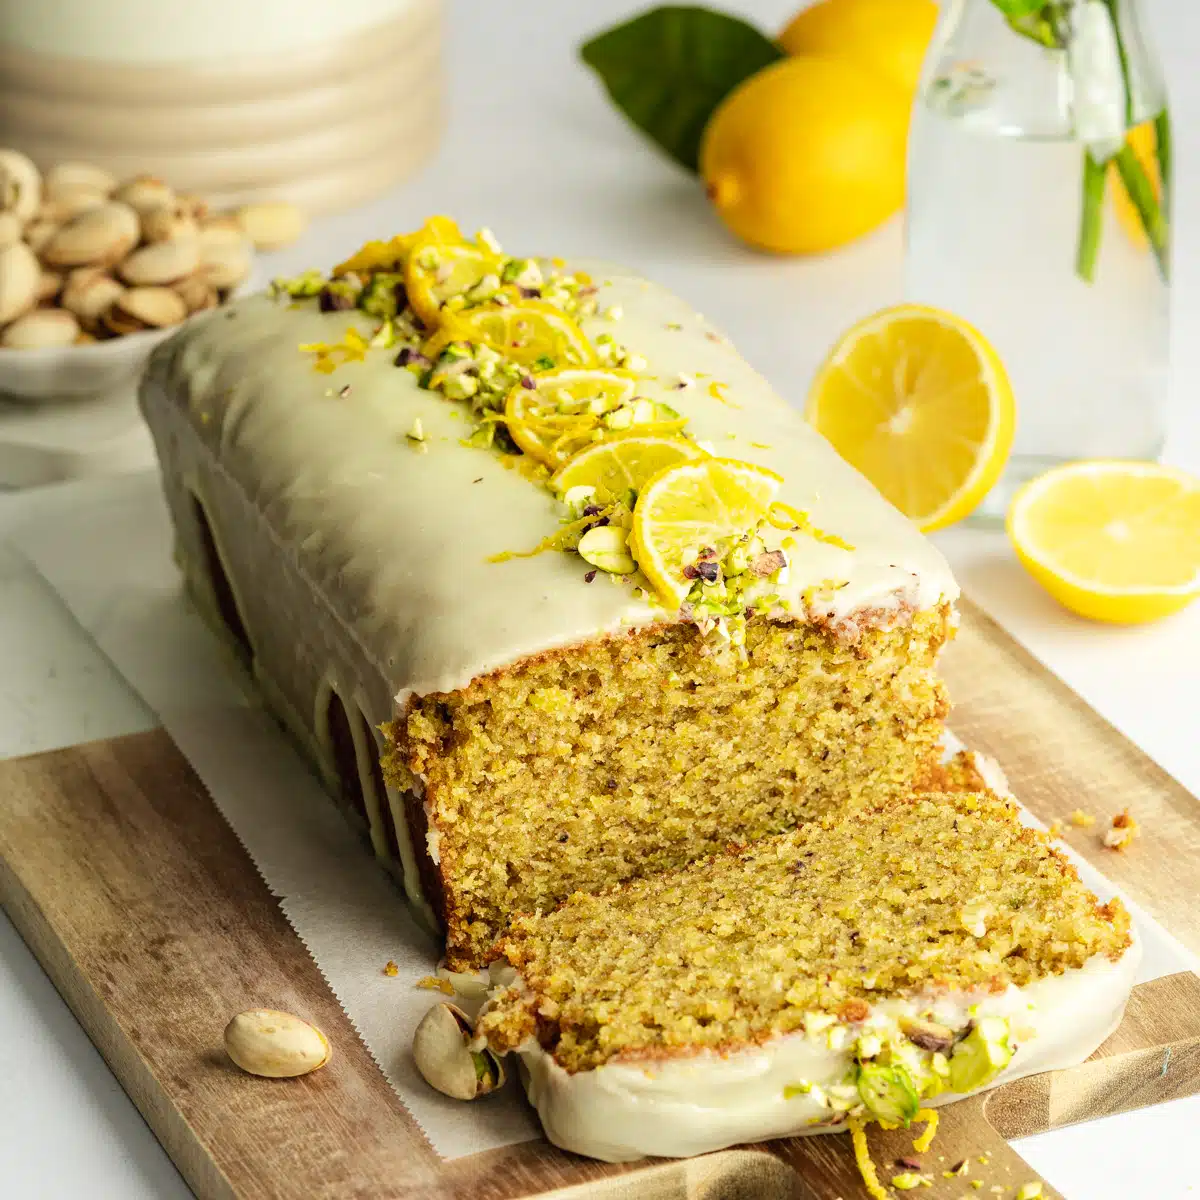 a lemon olive oil pistachio cake decorated with cream cheese, lemon slices and pistachios, there is a slice taken from it revealing the tender interior of the cake.